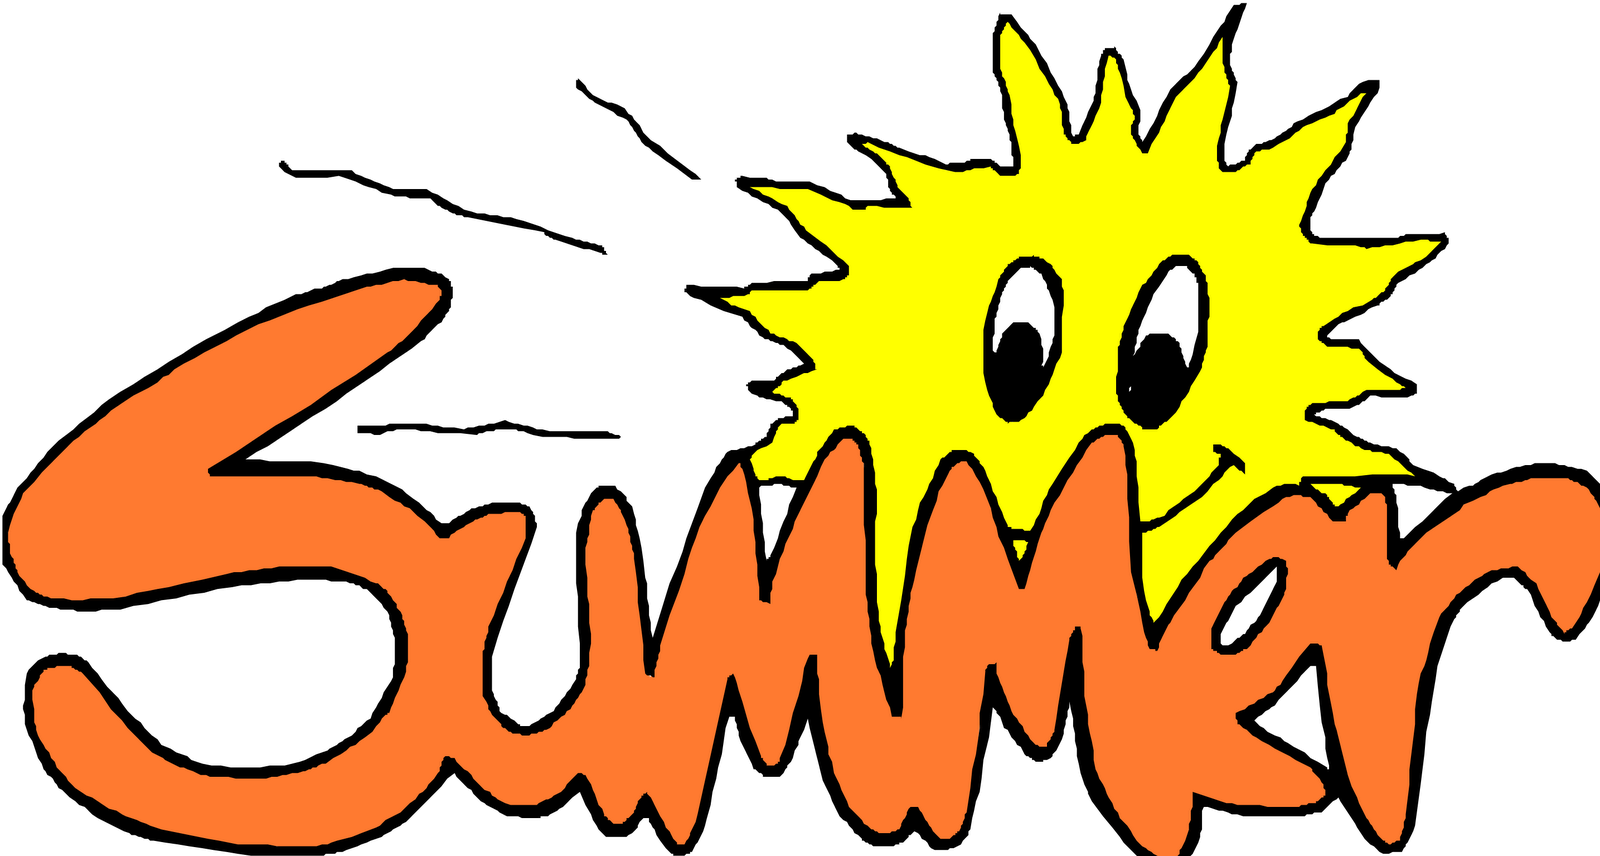 Summer clip art images. Sunny clipart day activity